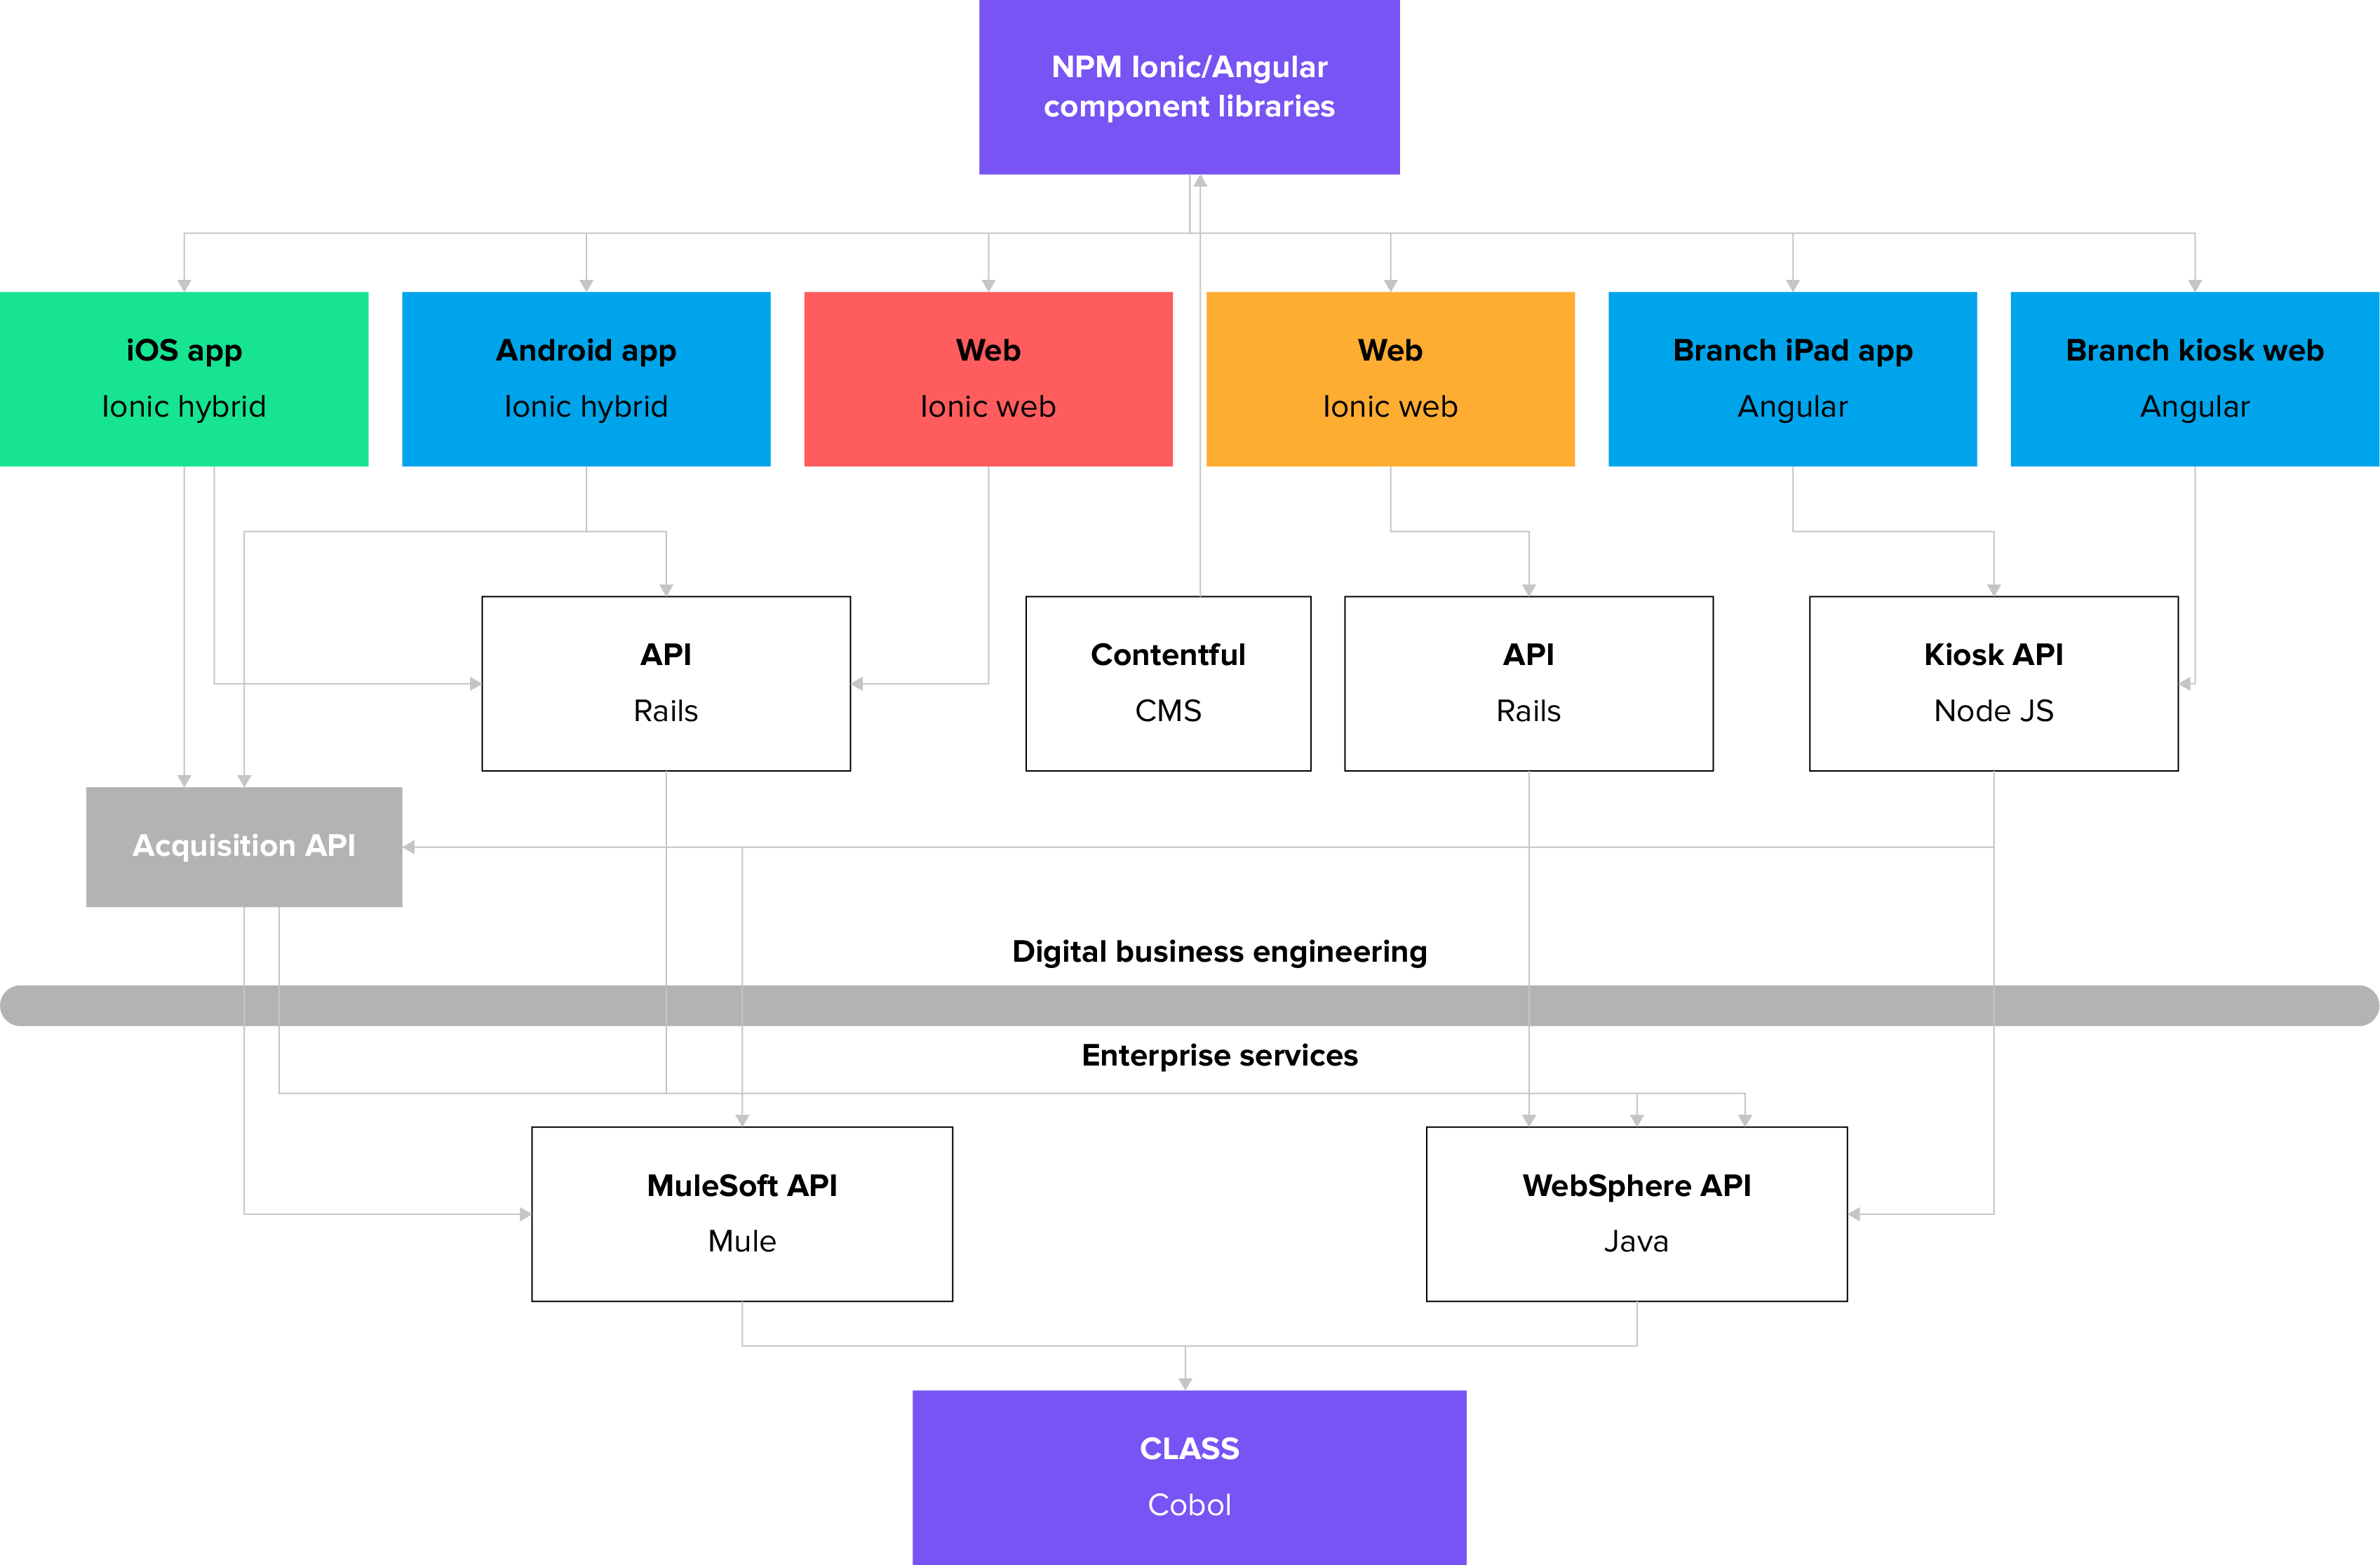 Proposed technology stack architecture for the client